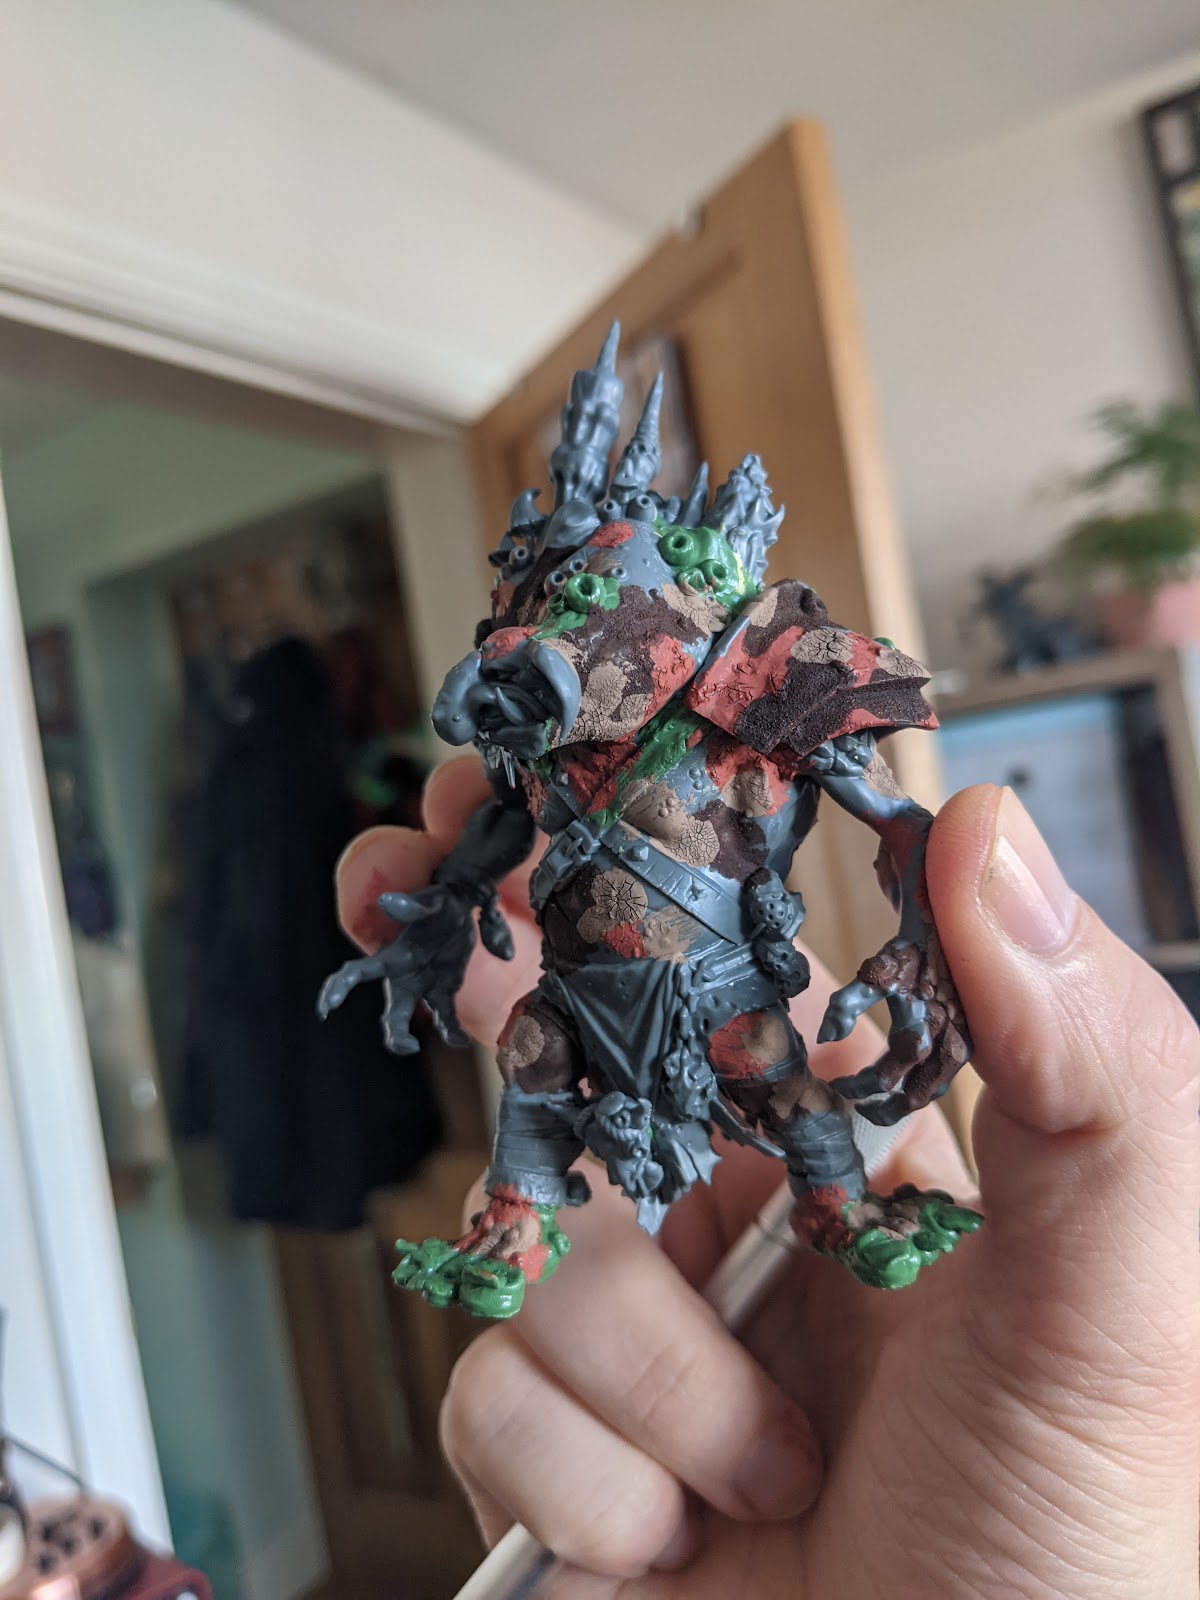 A model troll in grey plastic and green modelling putty, made from parts of several models and partially painted with textured paint.